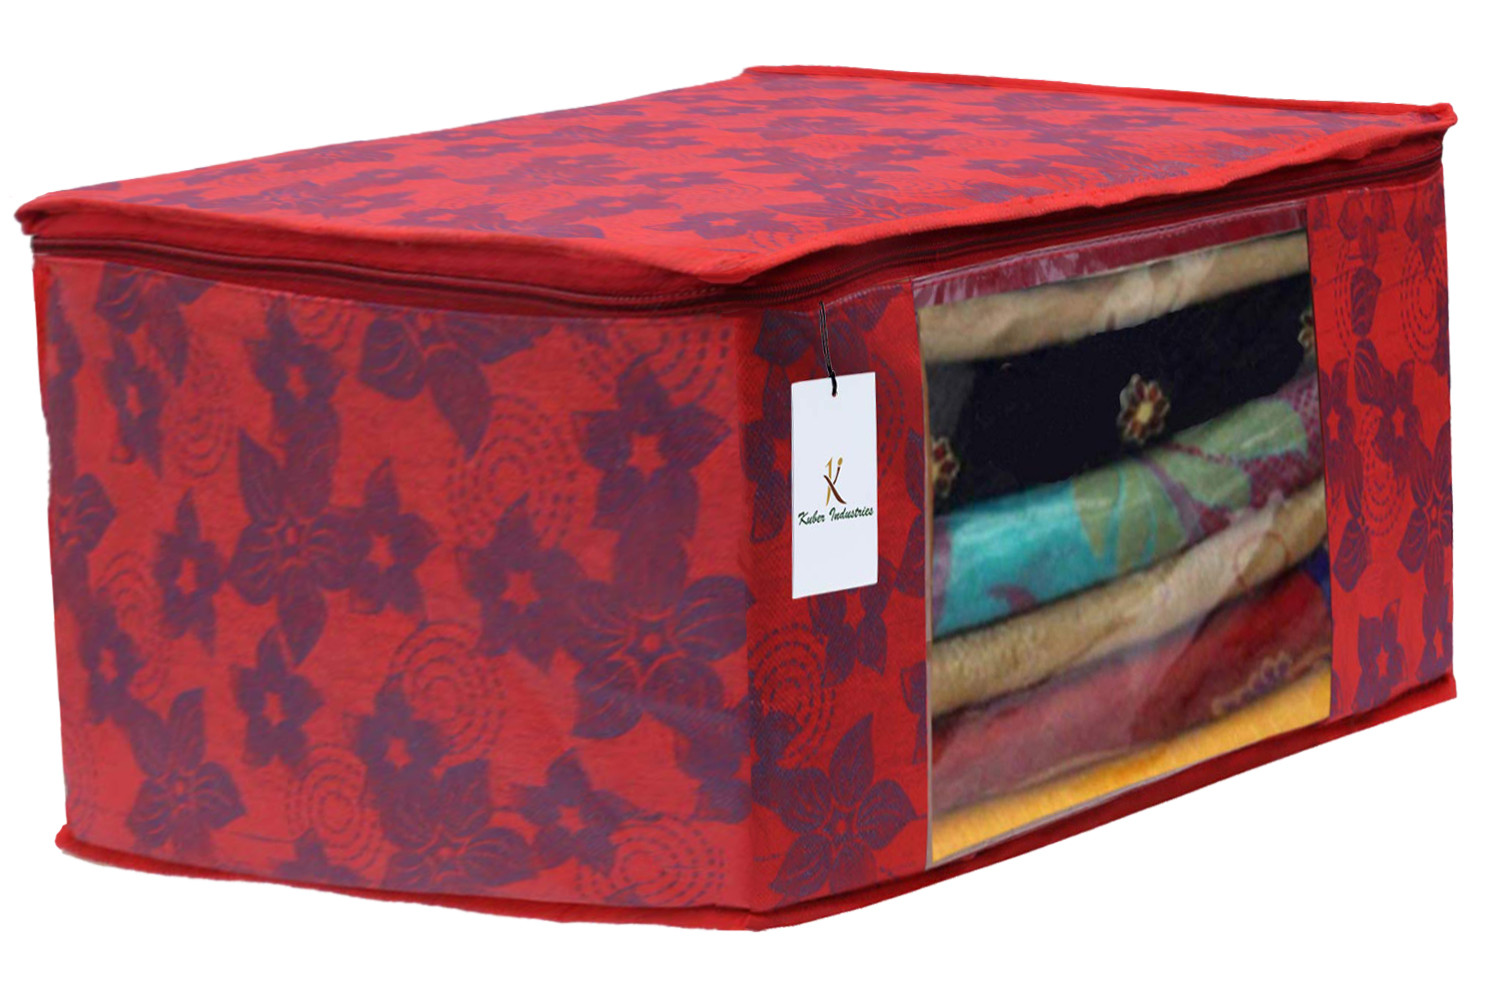 Kuber Industries Metalic Printed Non Woven Saree Cover And Underbed Storage Bag, Storage Organiser, Blanket Cover, Gold & Red -CTKTC42389